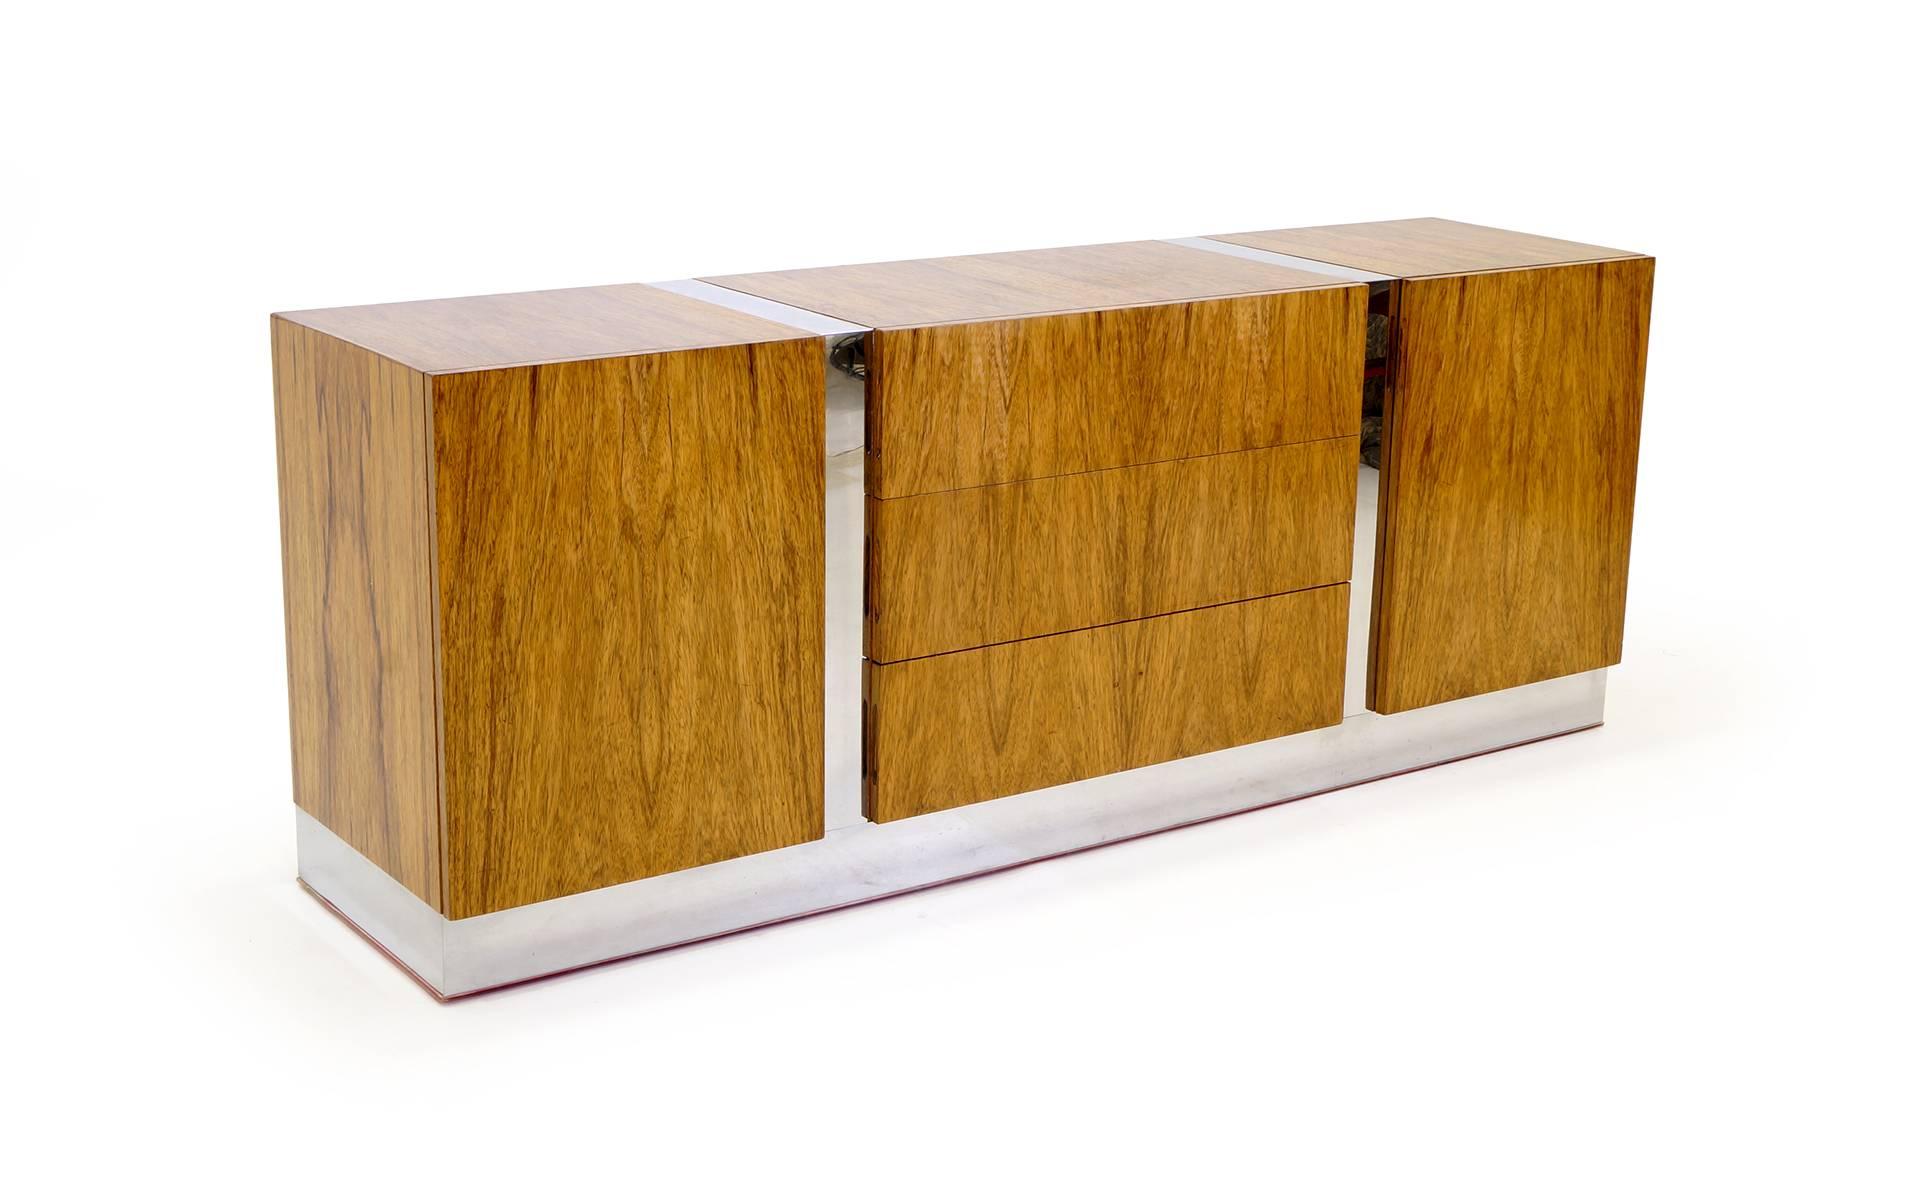 Exceptional bleached Brazilian rosewood credenza / dresser with chrome base and accents designed by Milo Baughman. See our companion nightstand / side table and queen headboard. All in rare bleached Brazilian rosewood.